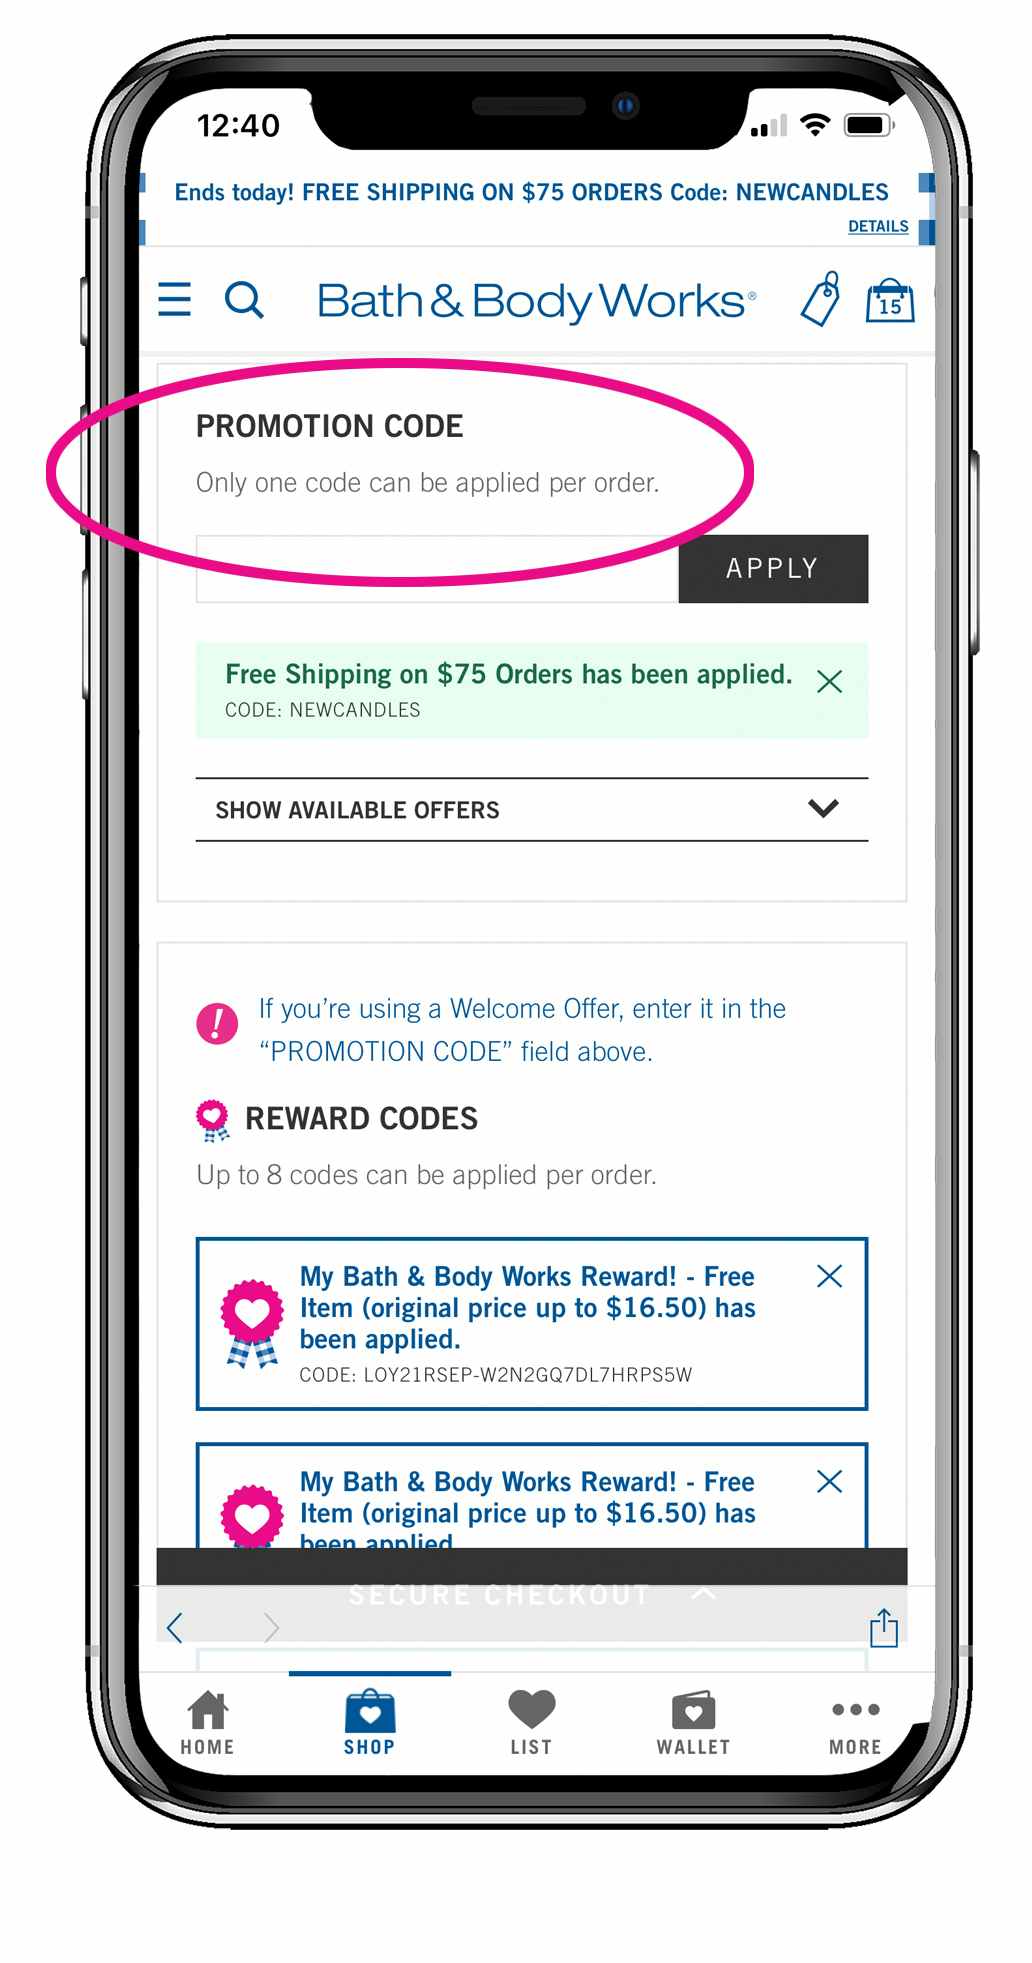 A graphic of a phone showing the Promotion Code box during checkout on the Bath & Body Works app.